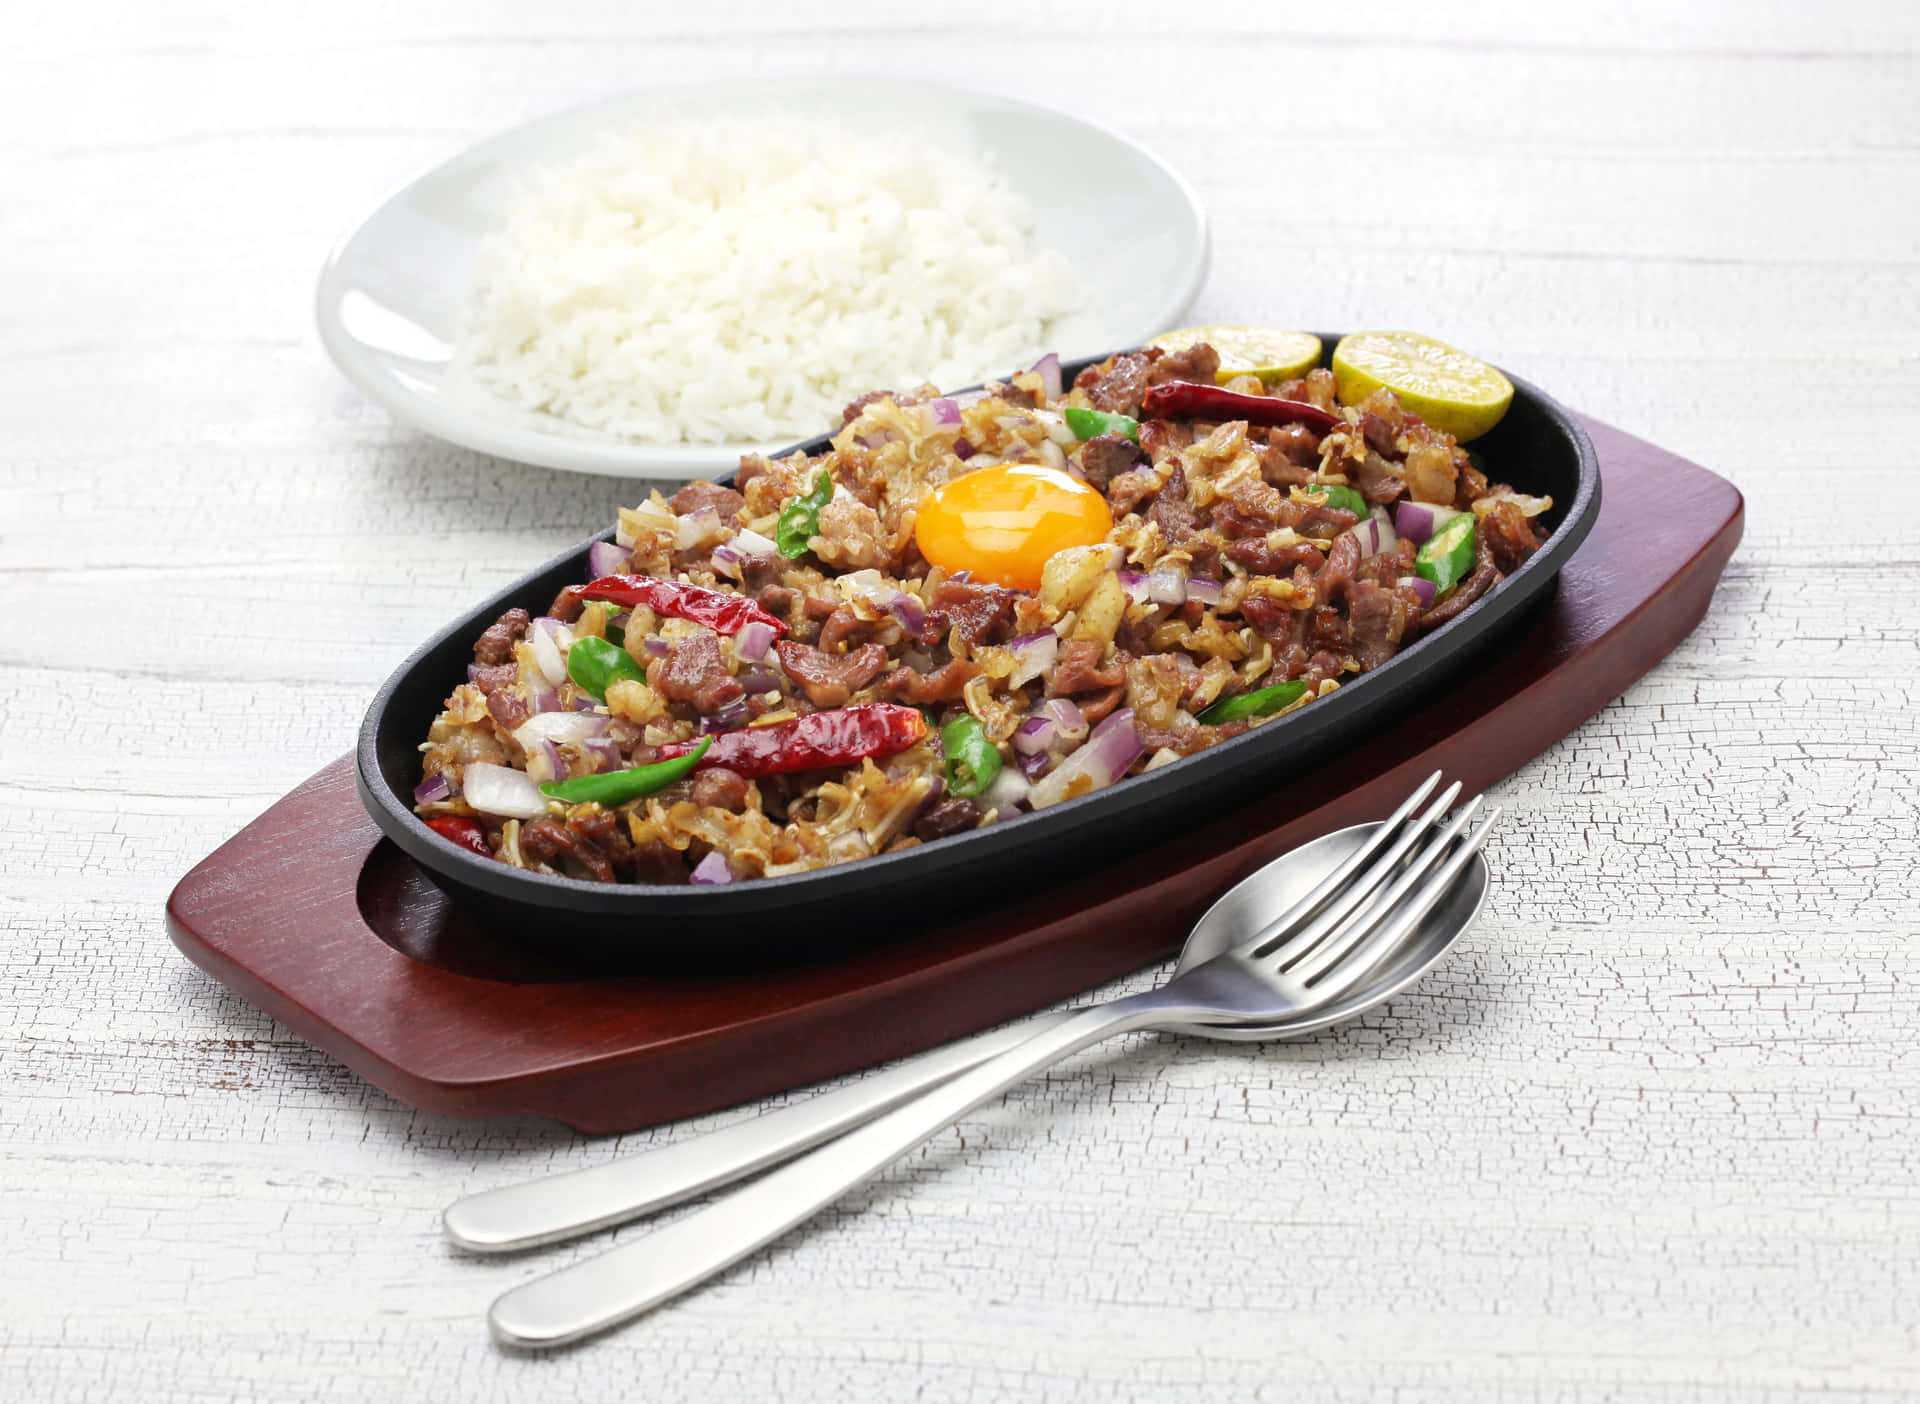 A Plate With Rice And Meat On It